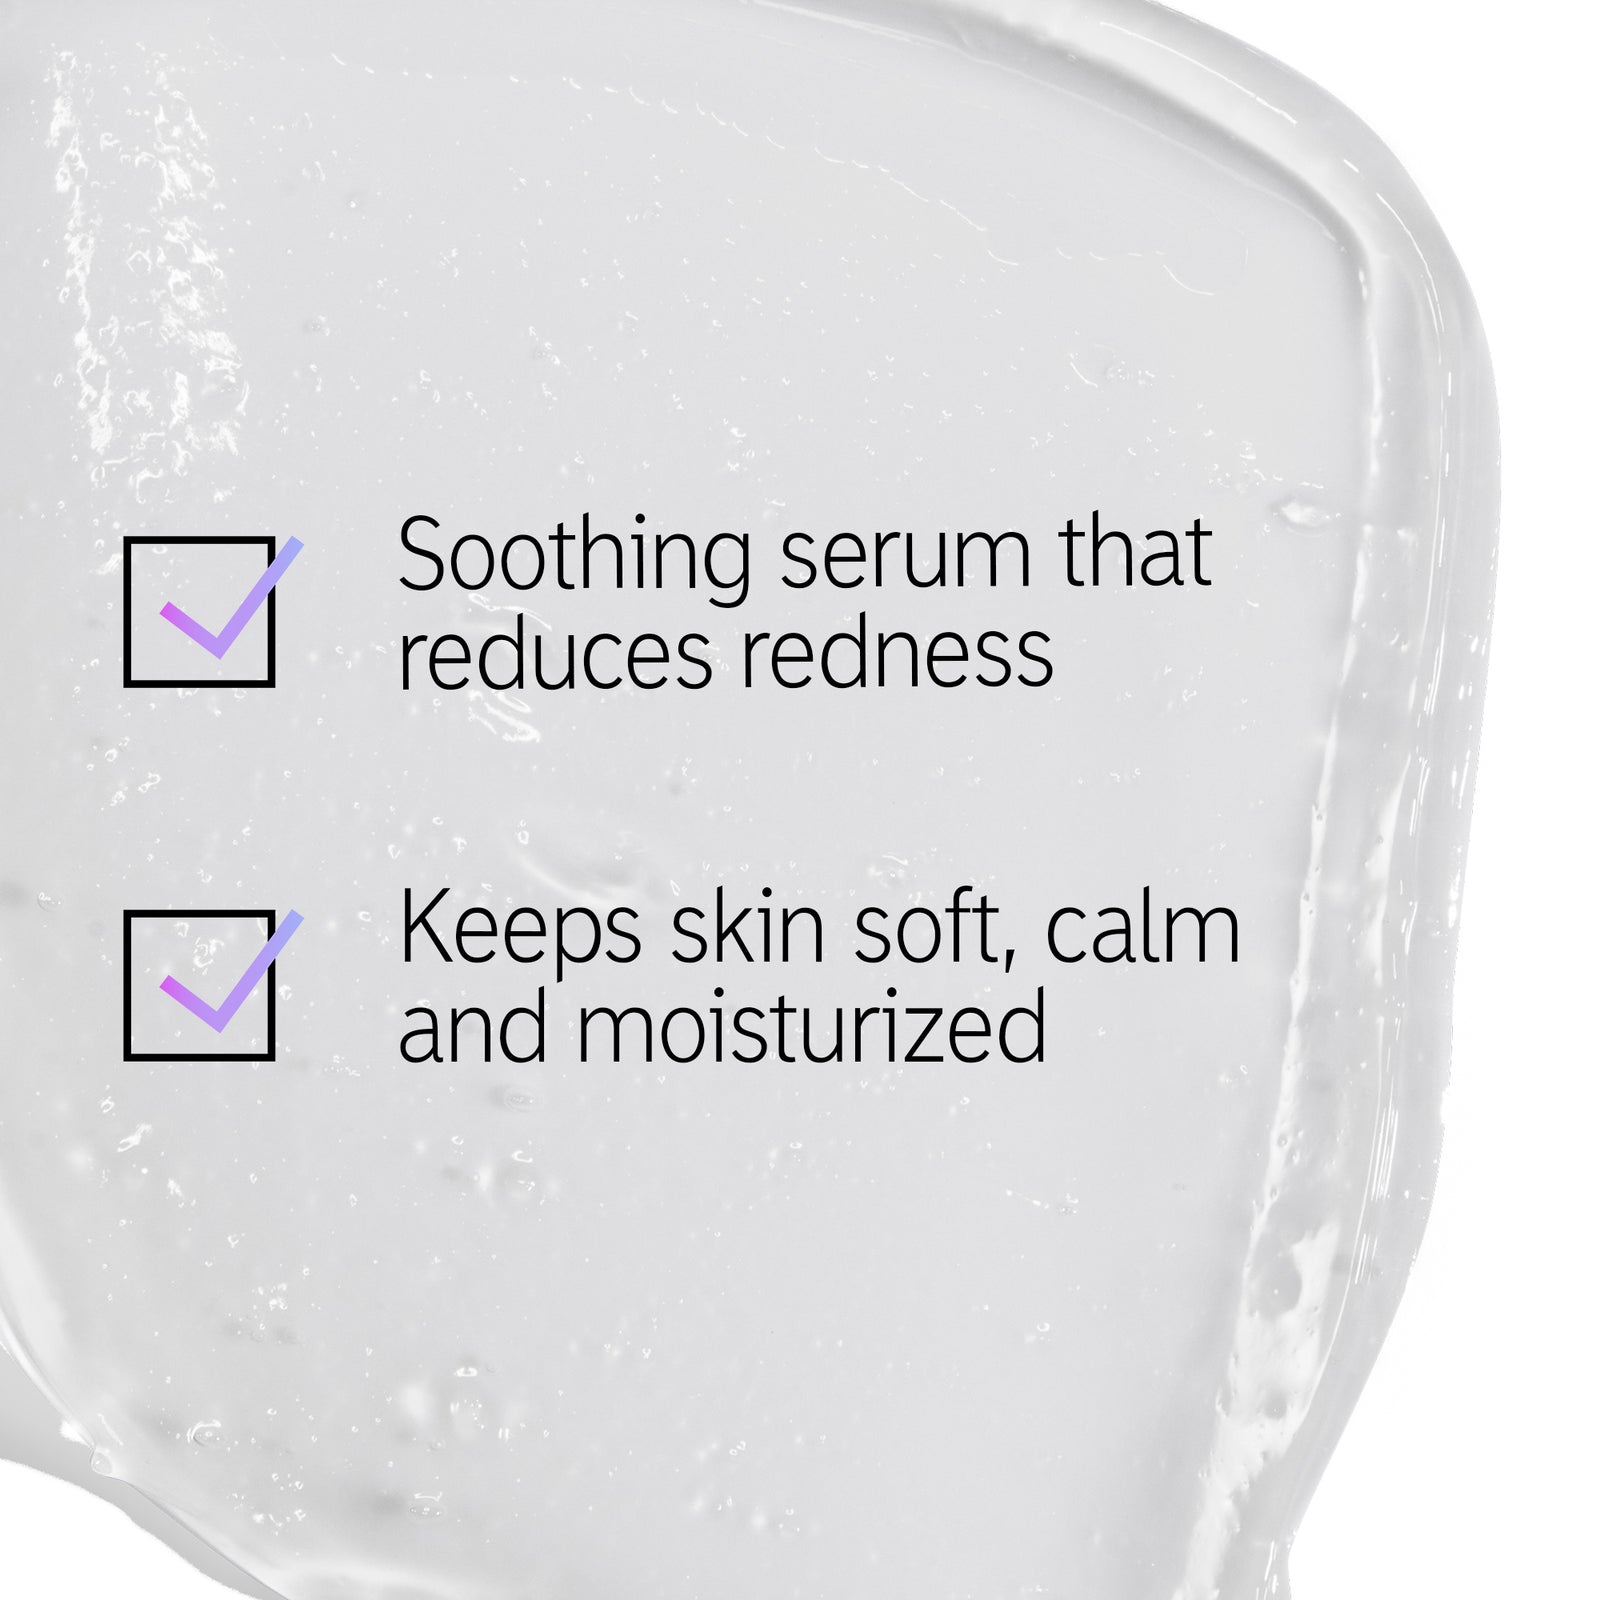 Glucoside Serum texture shot with text overlay listing the two main benefits